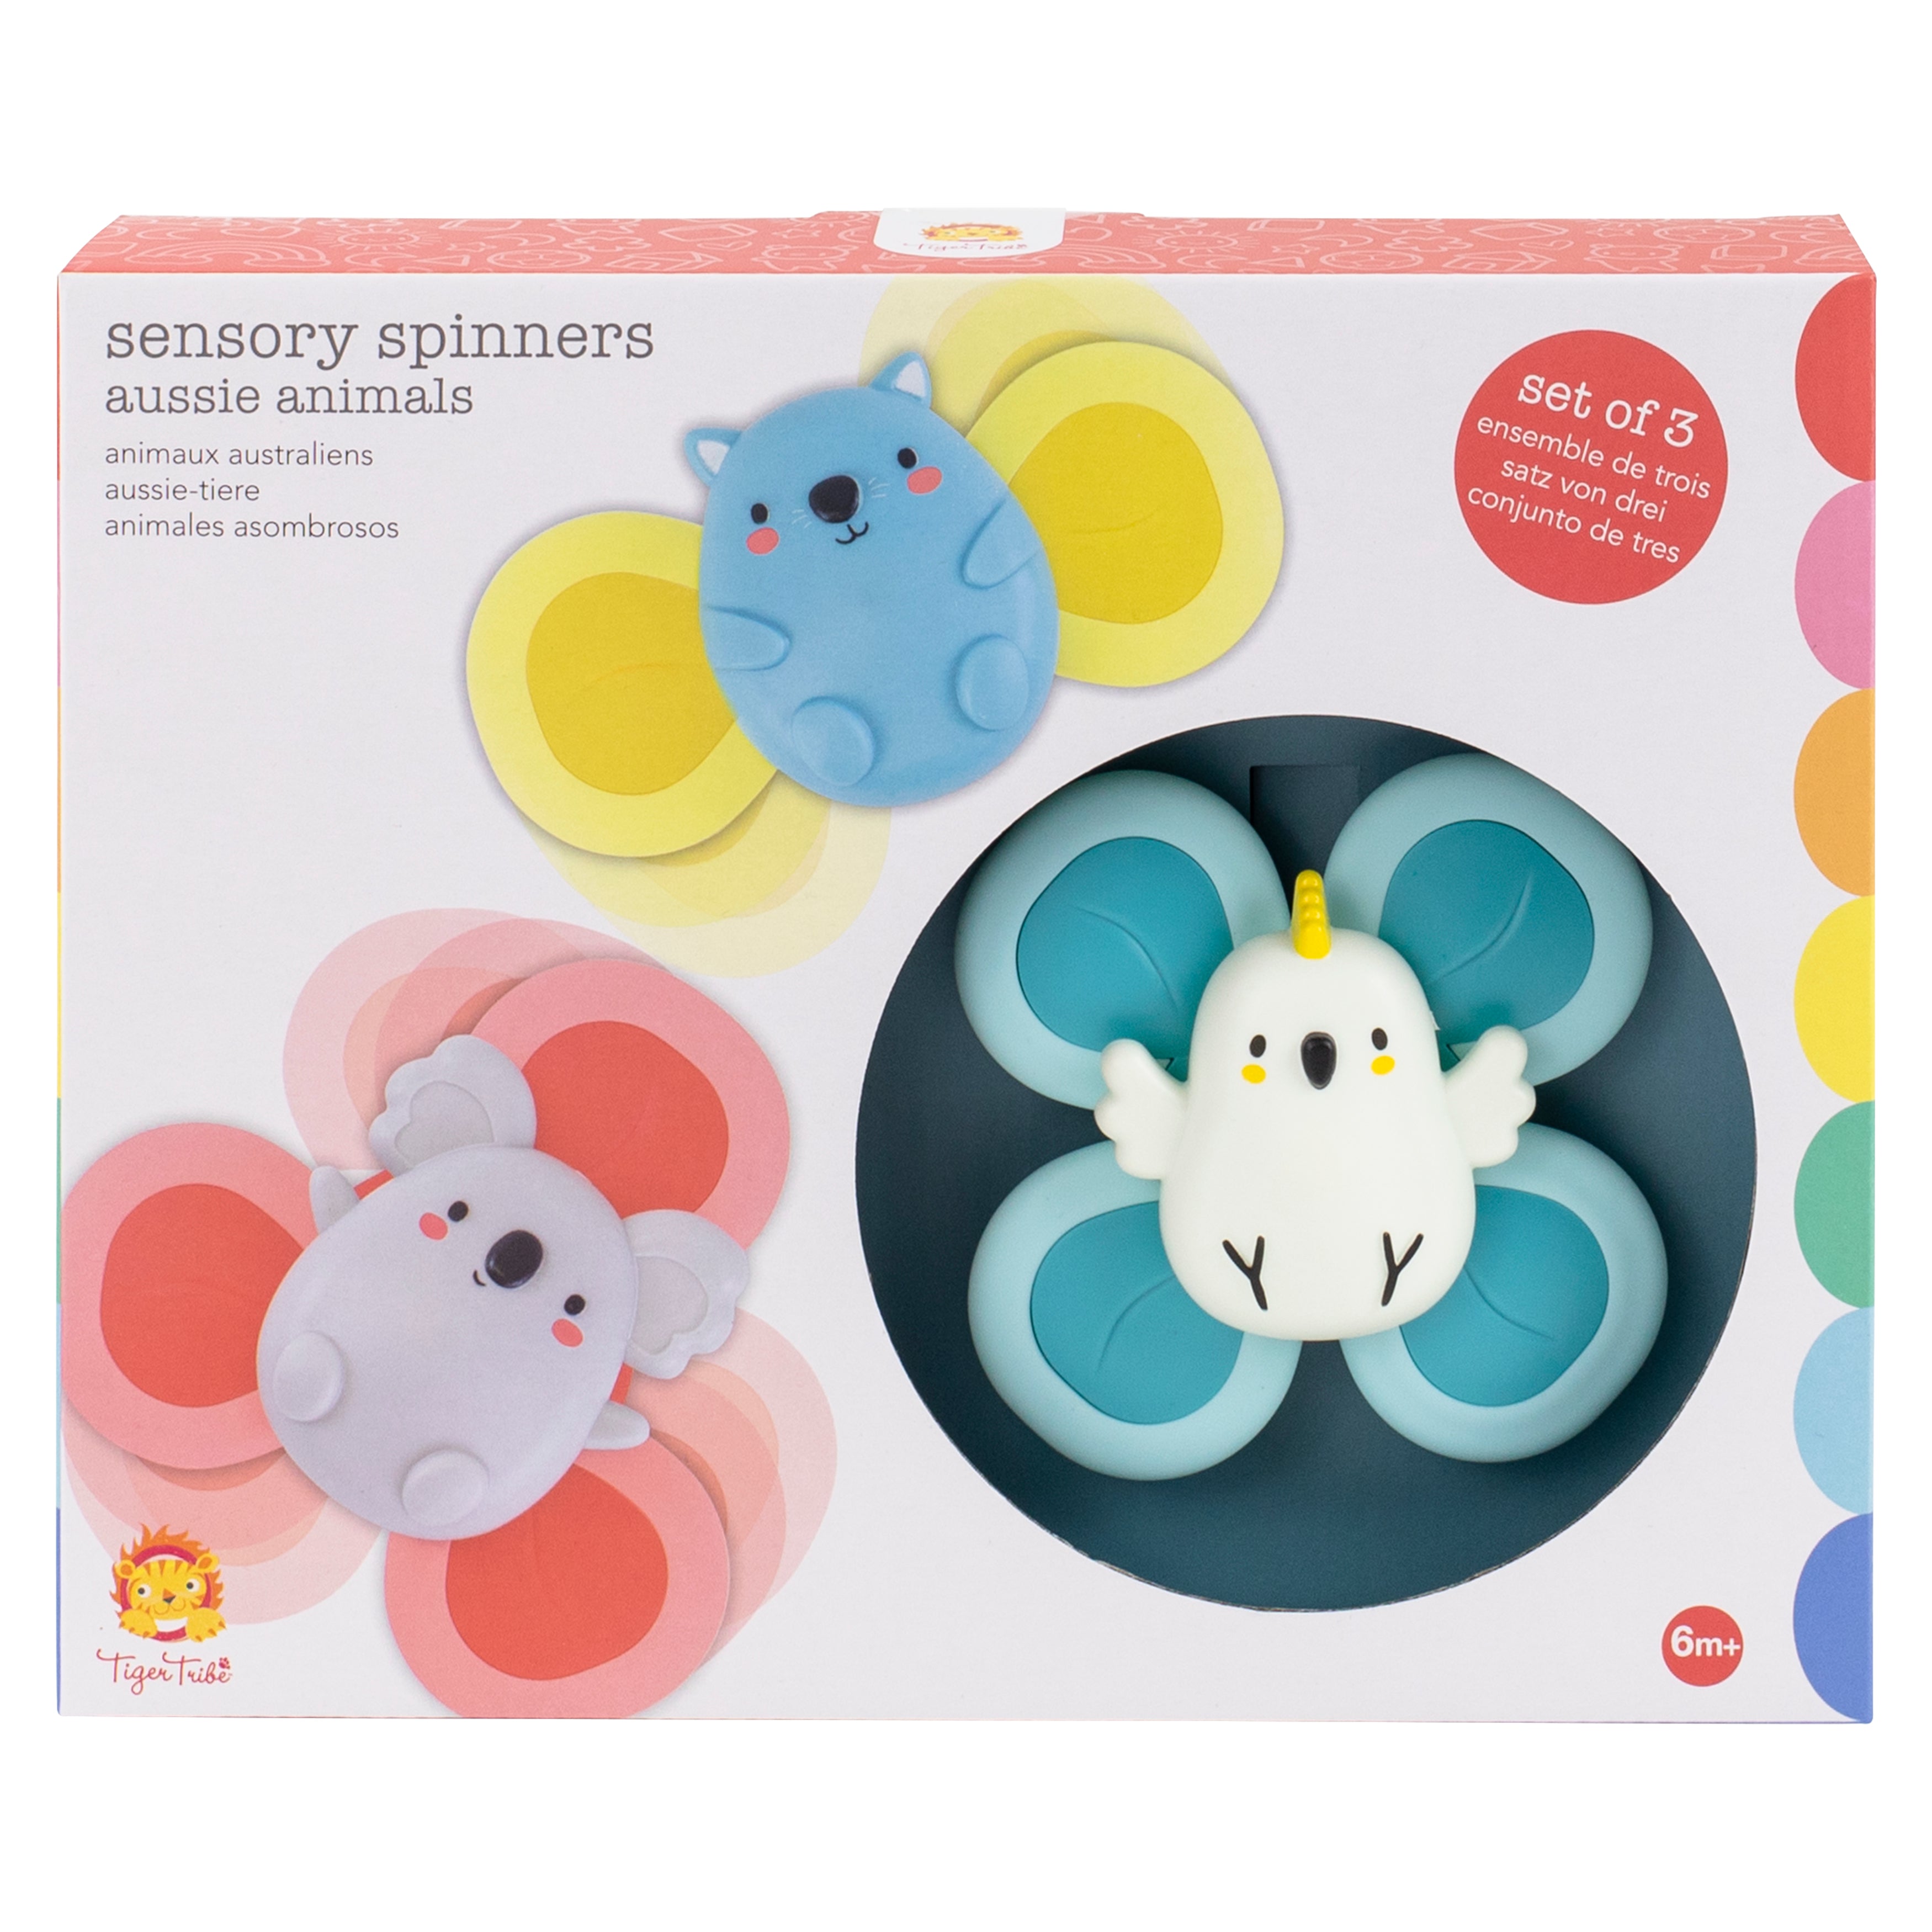 Tiger Tribe Sensory Spinners – Aussie Animals